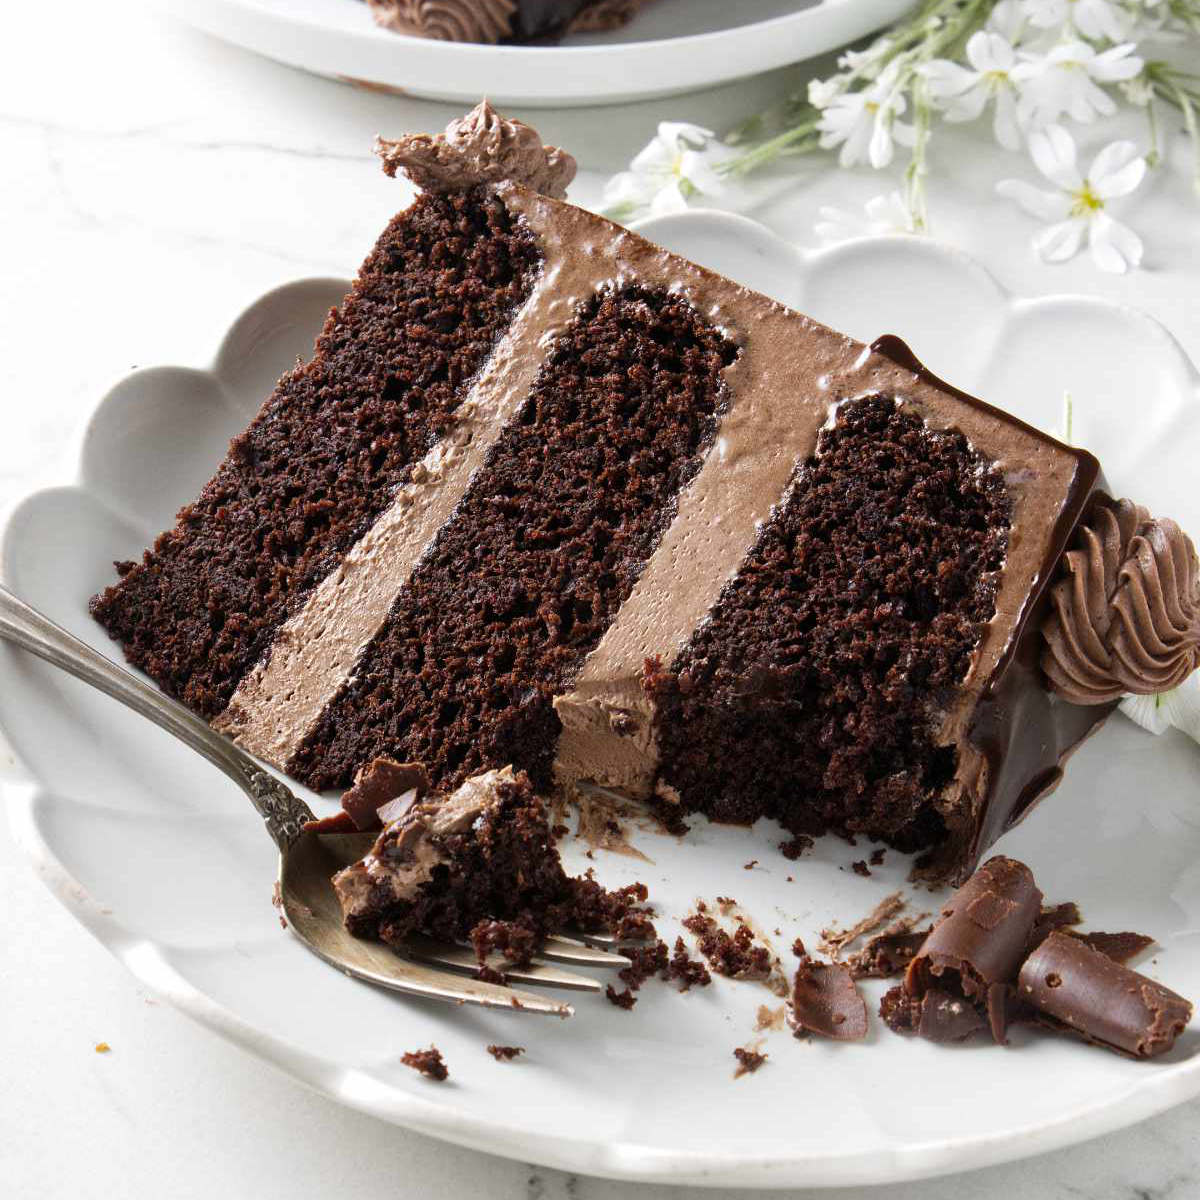 A slice of triple chocolate cake with three layers and chocolate buttercream.